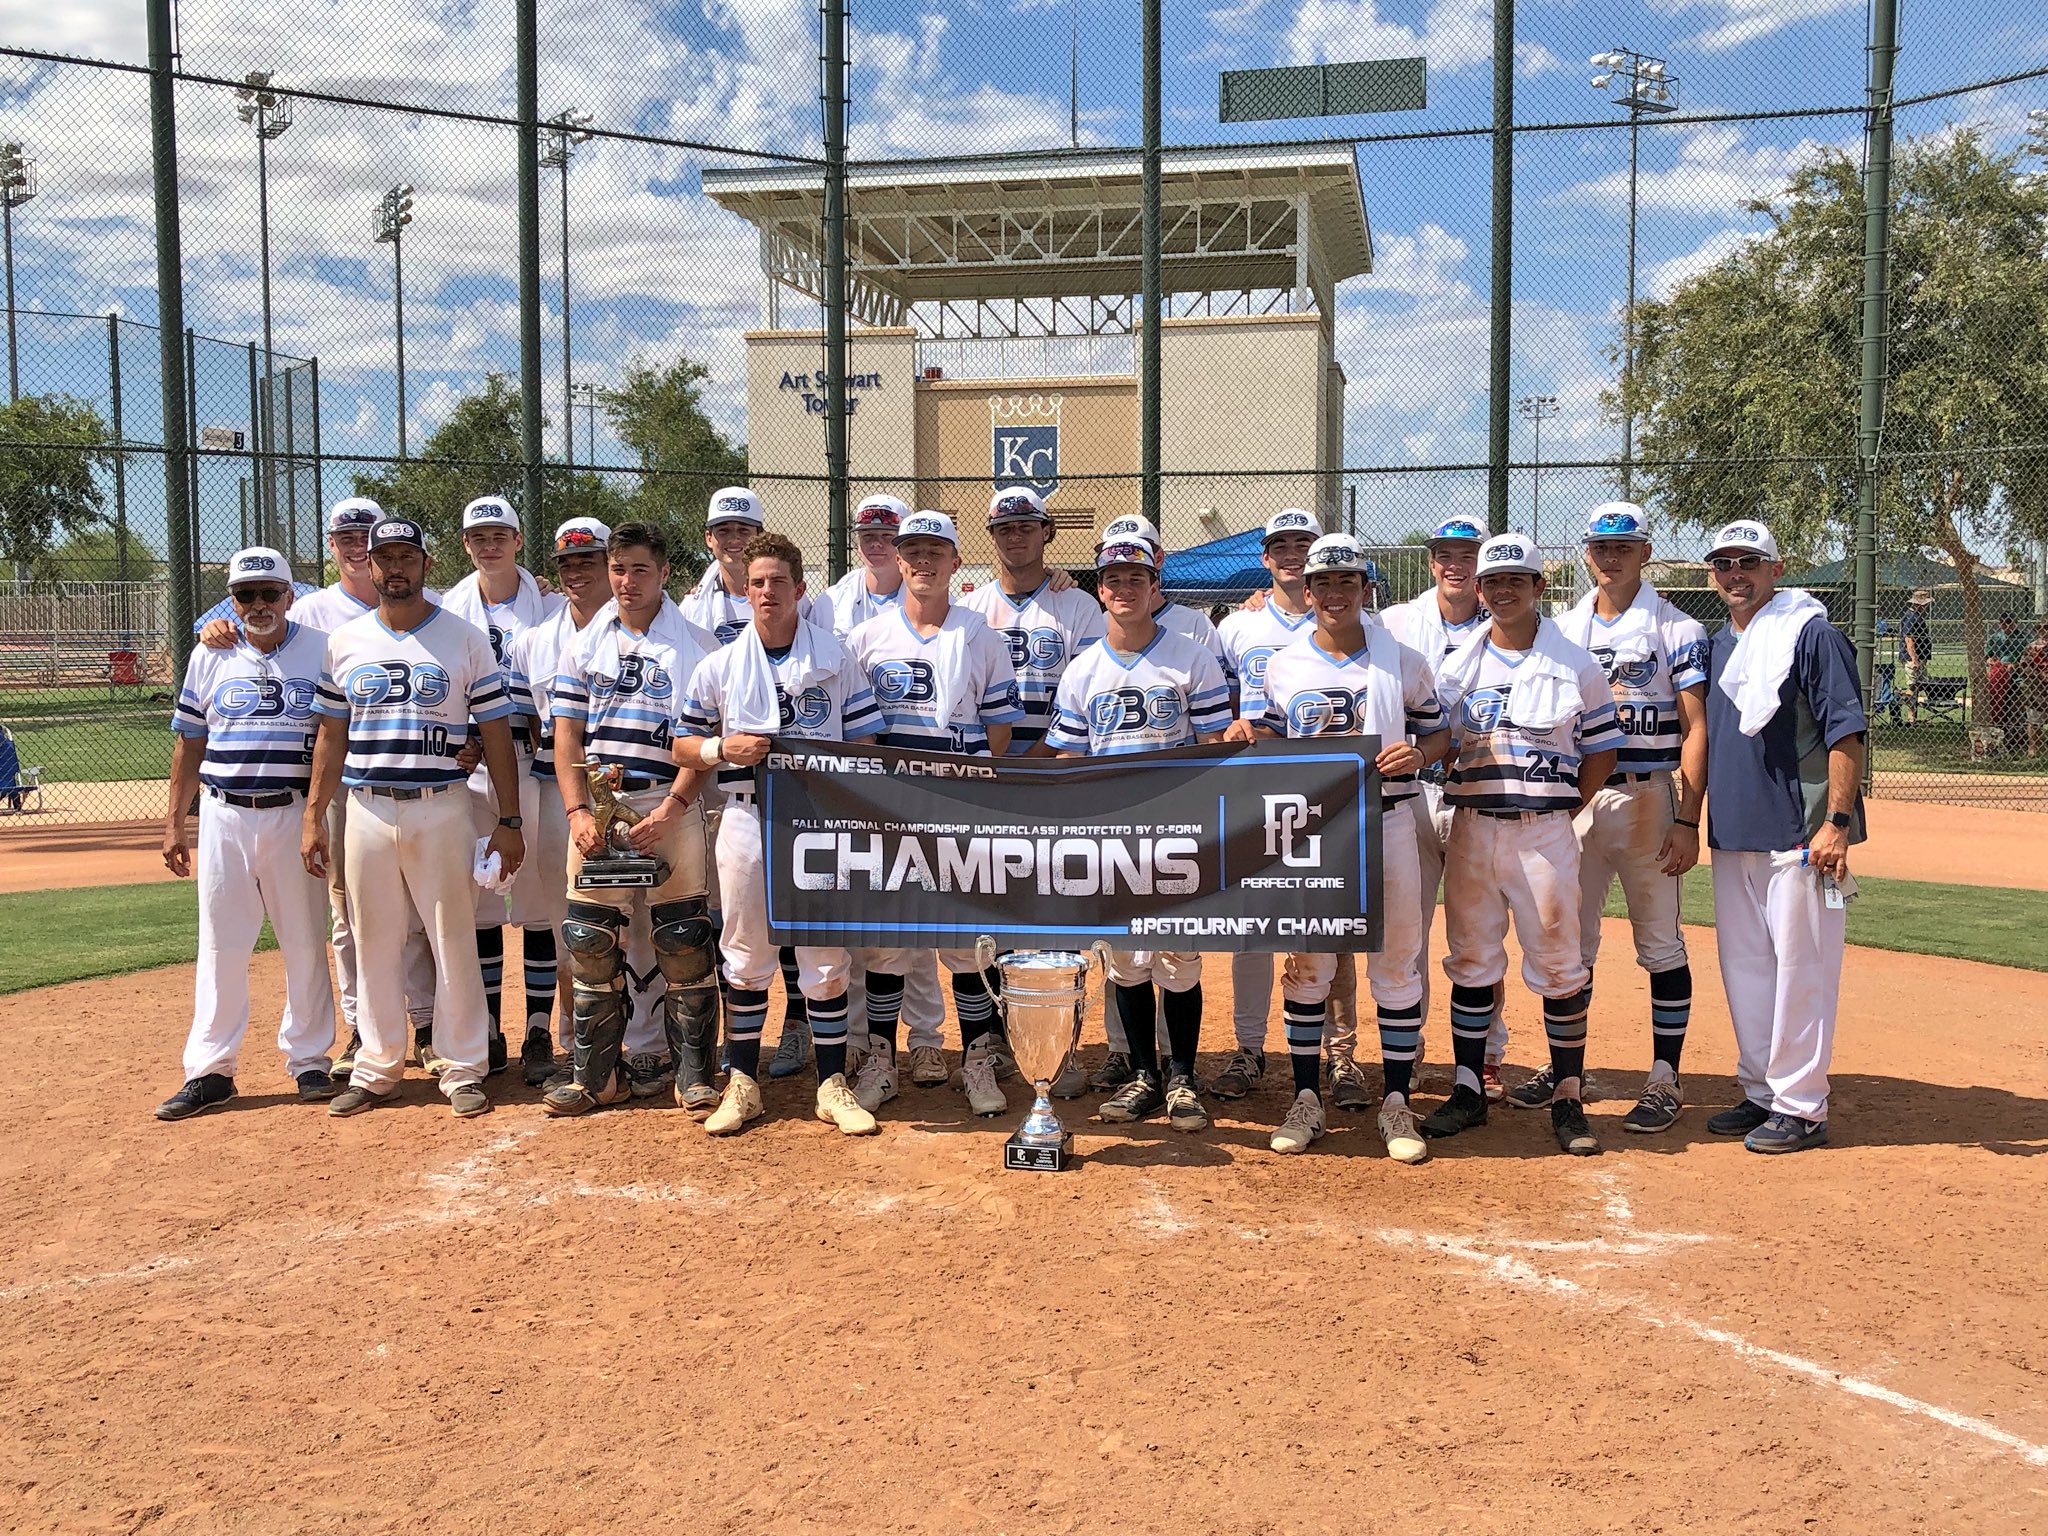 PG Tournaments on Twitter "Congratulations to GBG Marucci 2020 Navy on